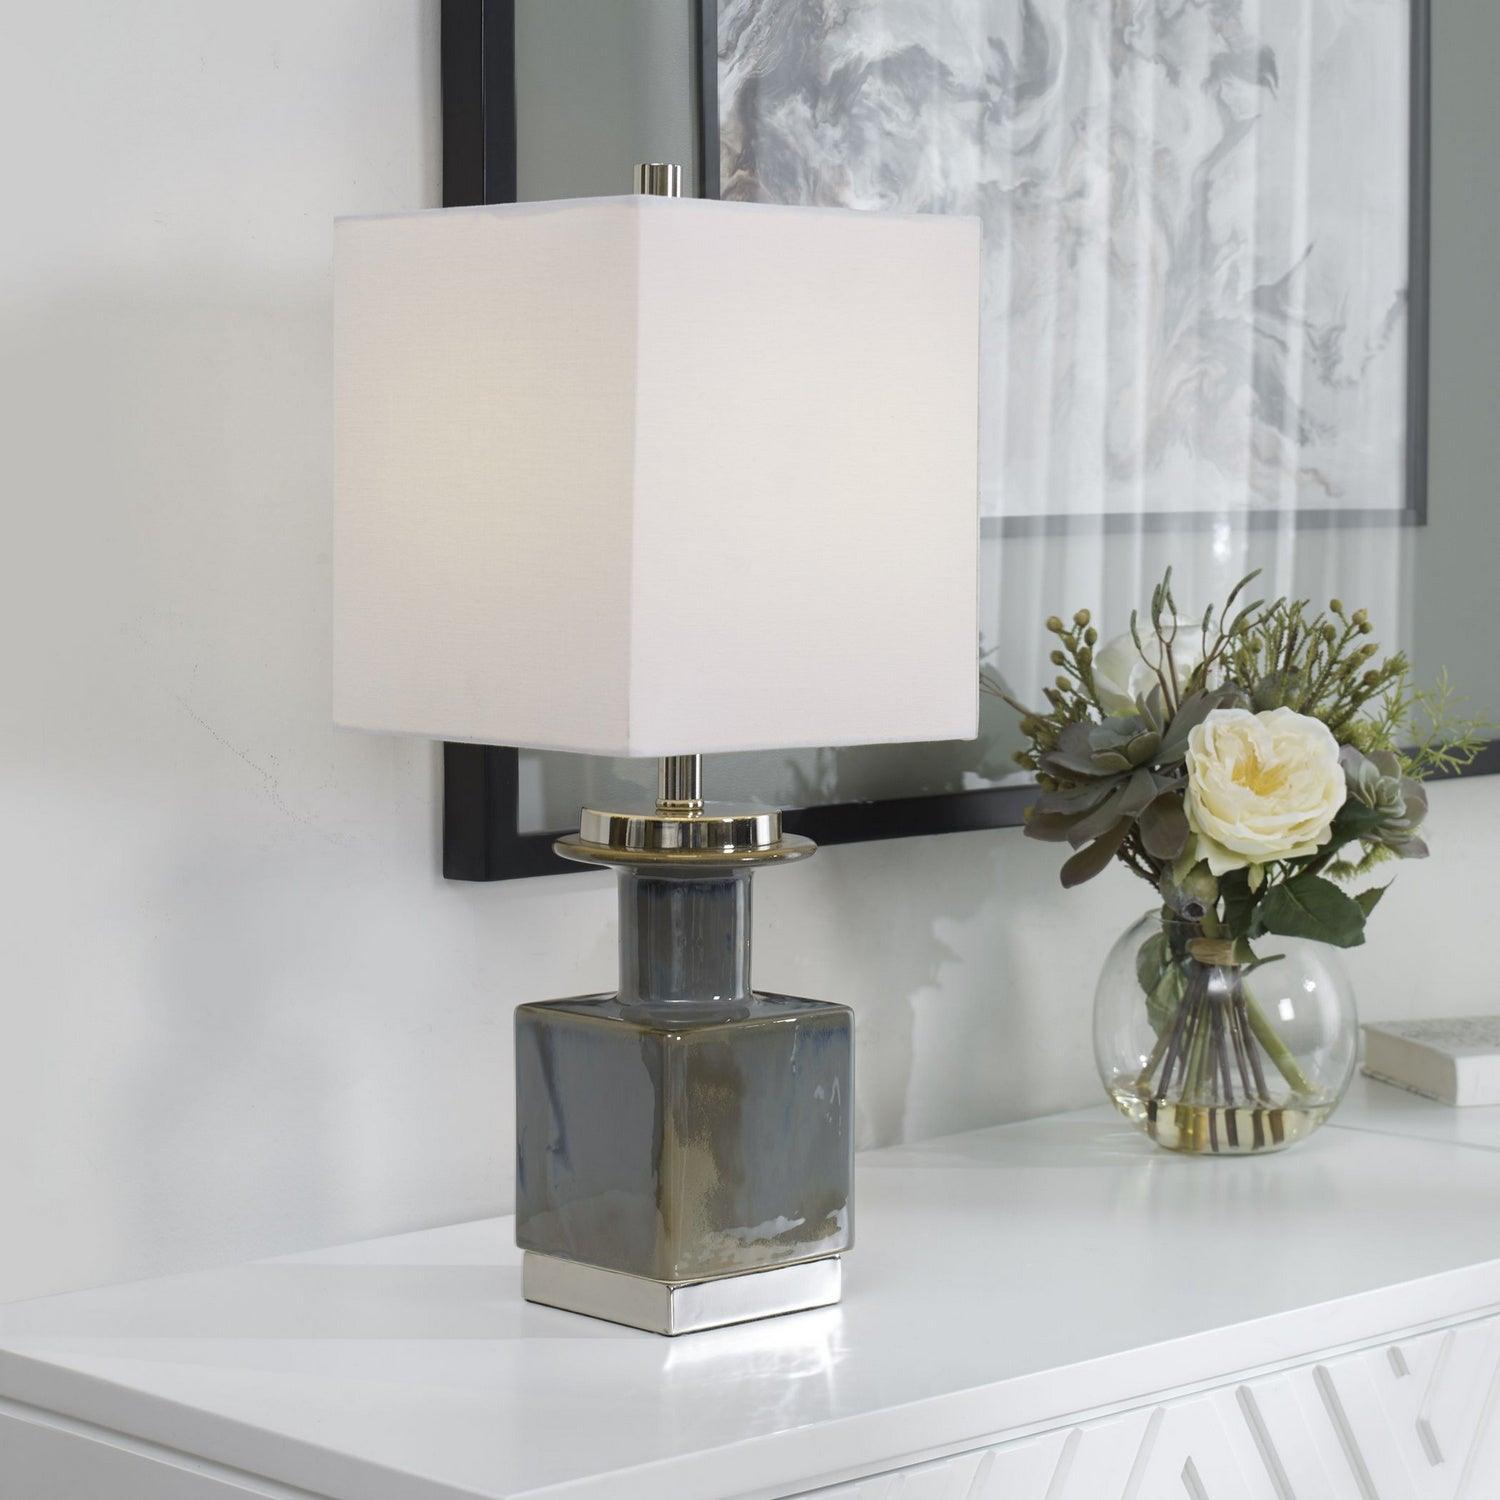 The Uttermost - Cabrillo One Light Accent Lamp - 30002-1 | Montreal Lighting & Hardware